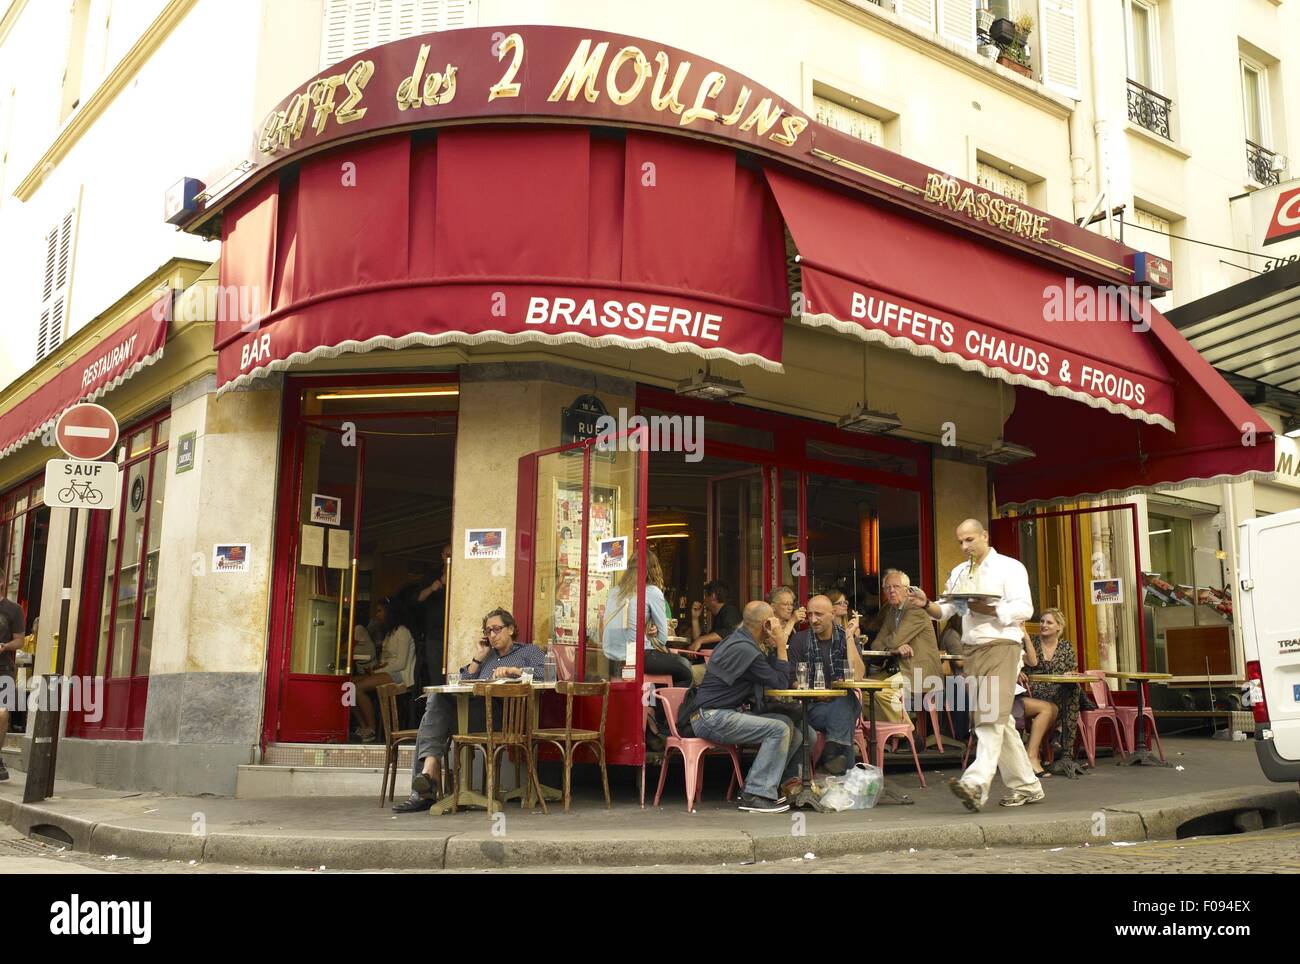 People sitting outside Brasserie Montmartre Cafe in Paris, France Stock Photo